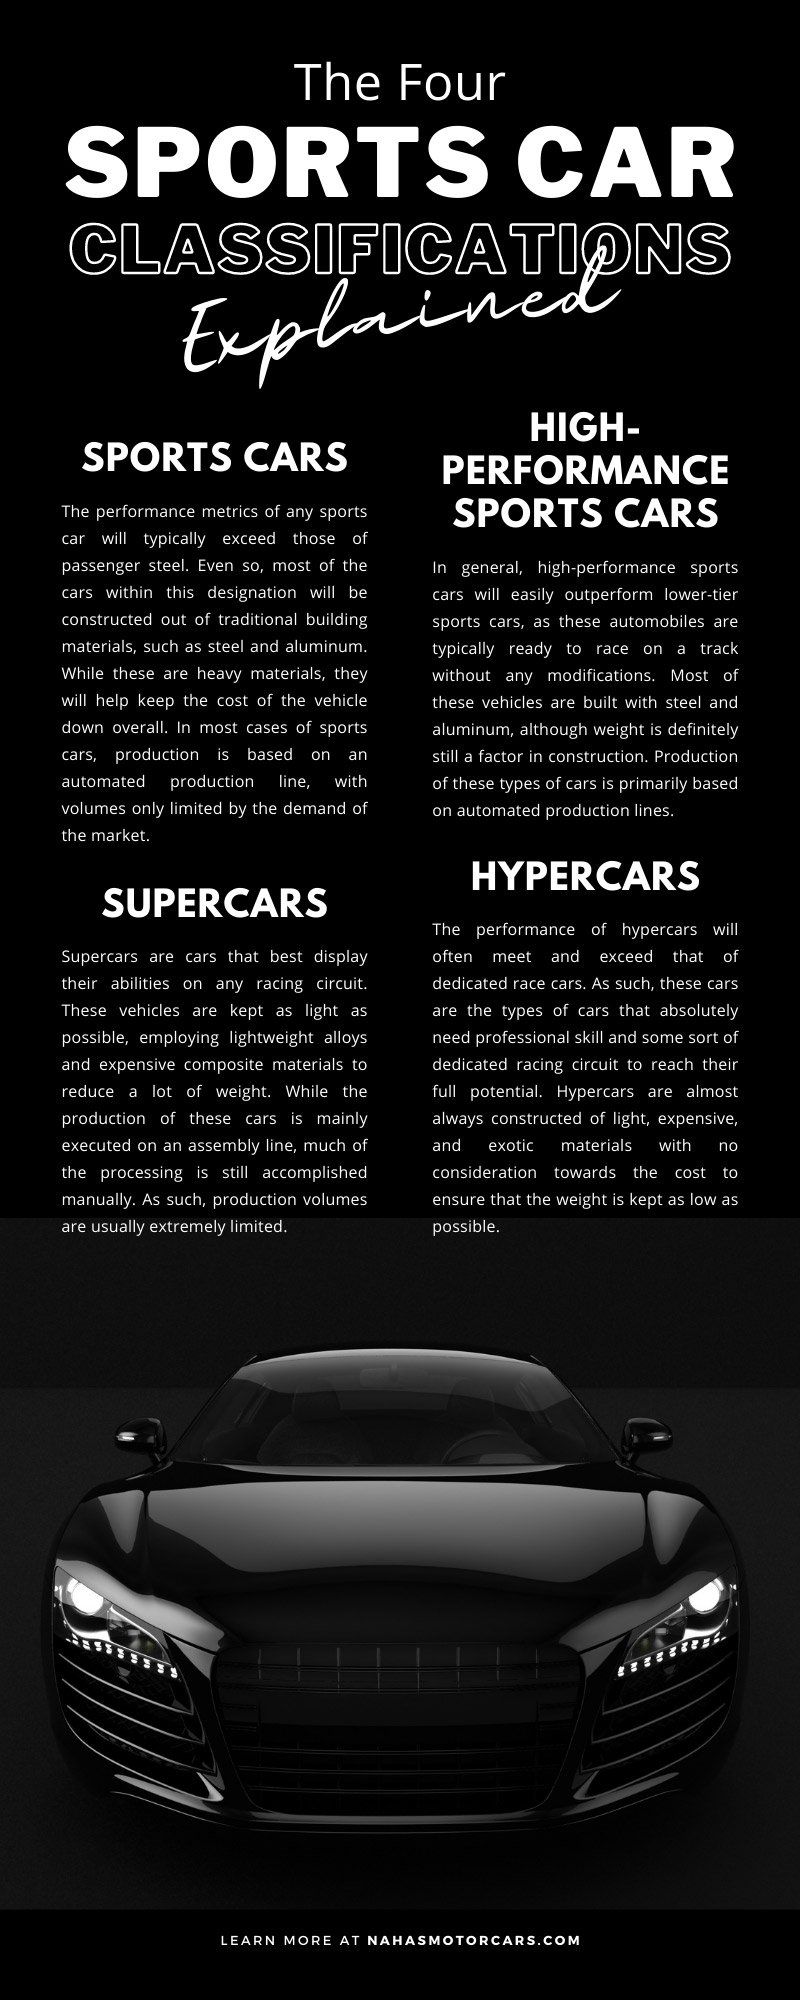 The Four Sports Car Classifications Explained